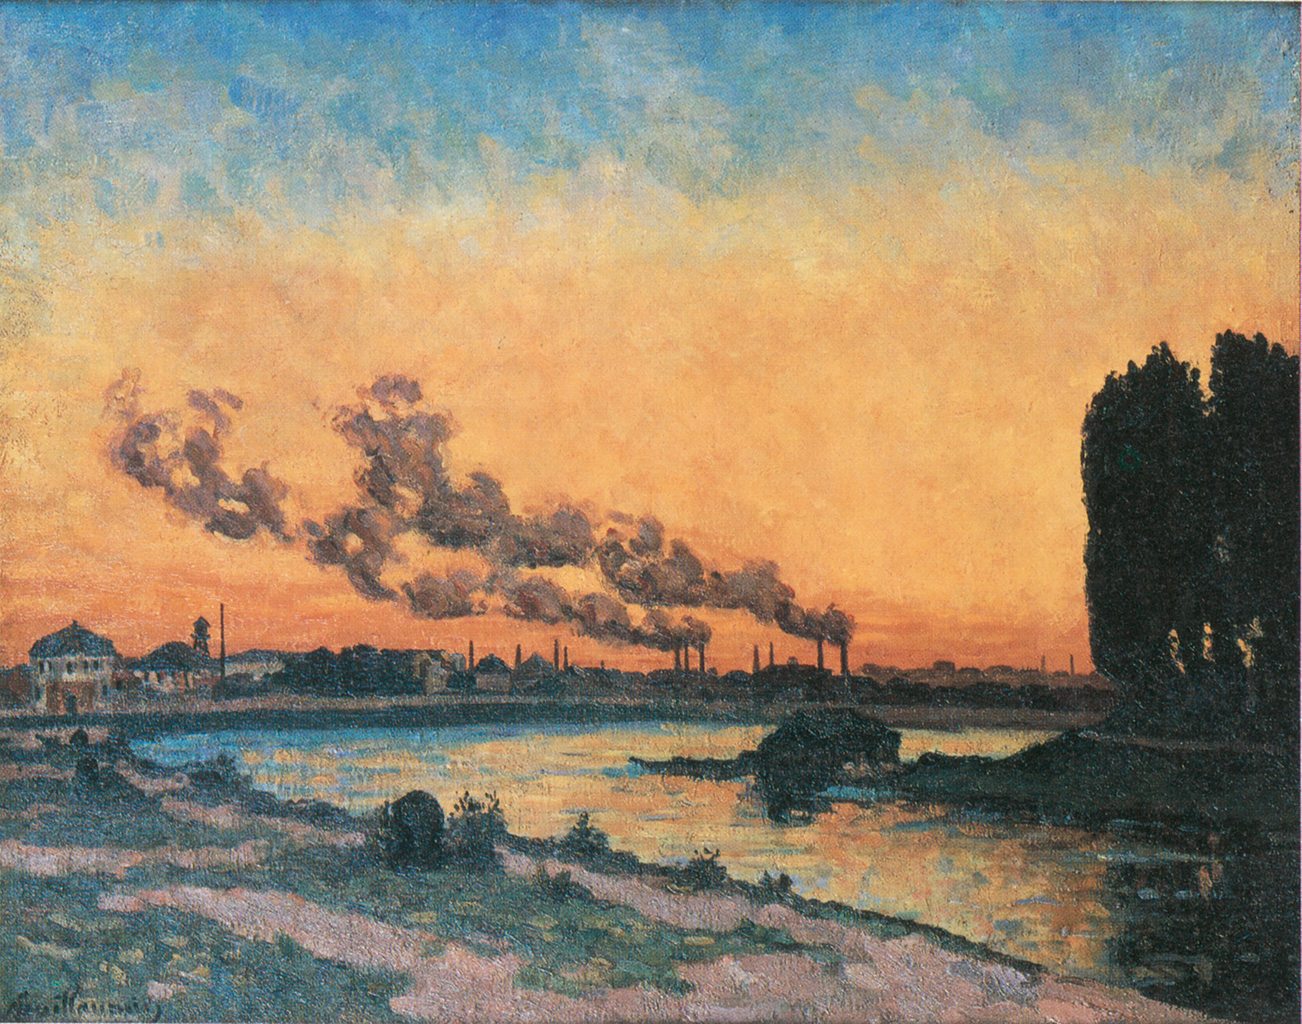 A painting depicting a view of a river at either sunset or sunrise. The orange and blue sky reflects off of the river below. In the background, is the skyline of a small city. The large chimneys also puff out large amounts of smog and smoke into the air.